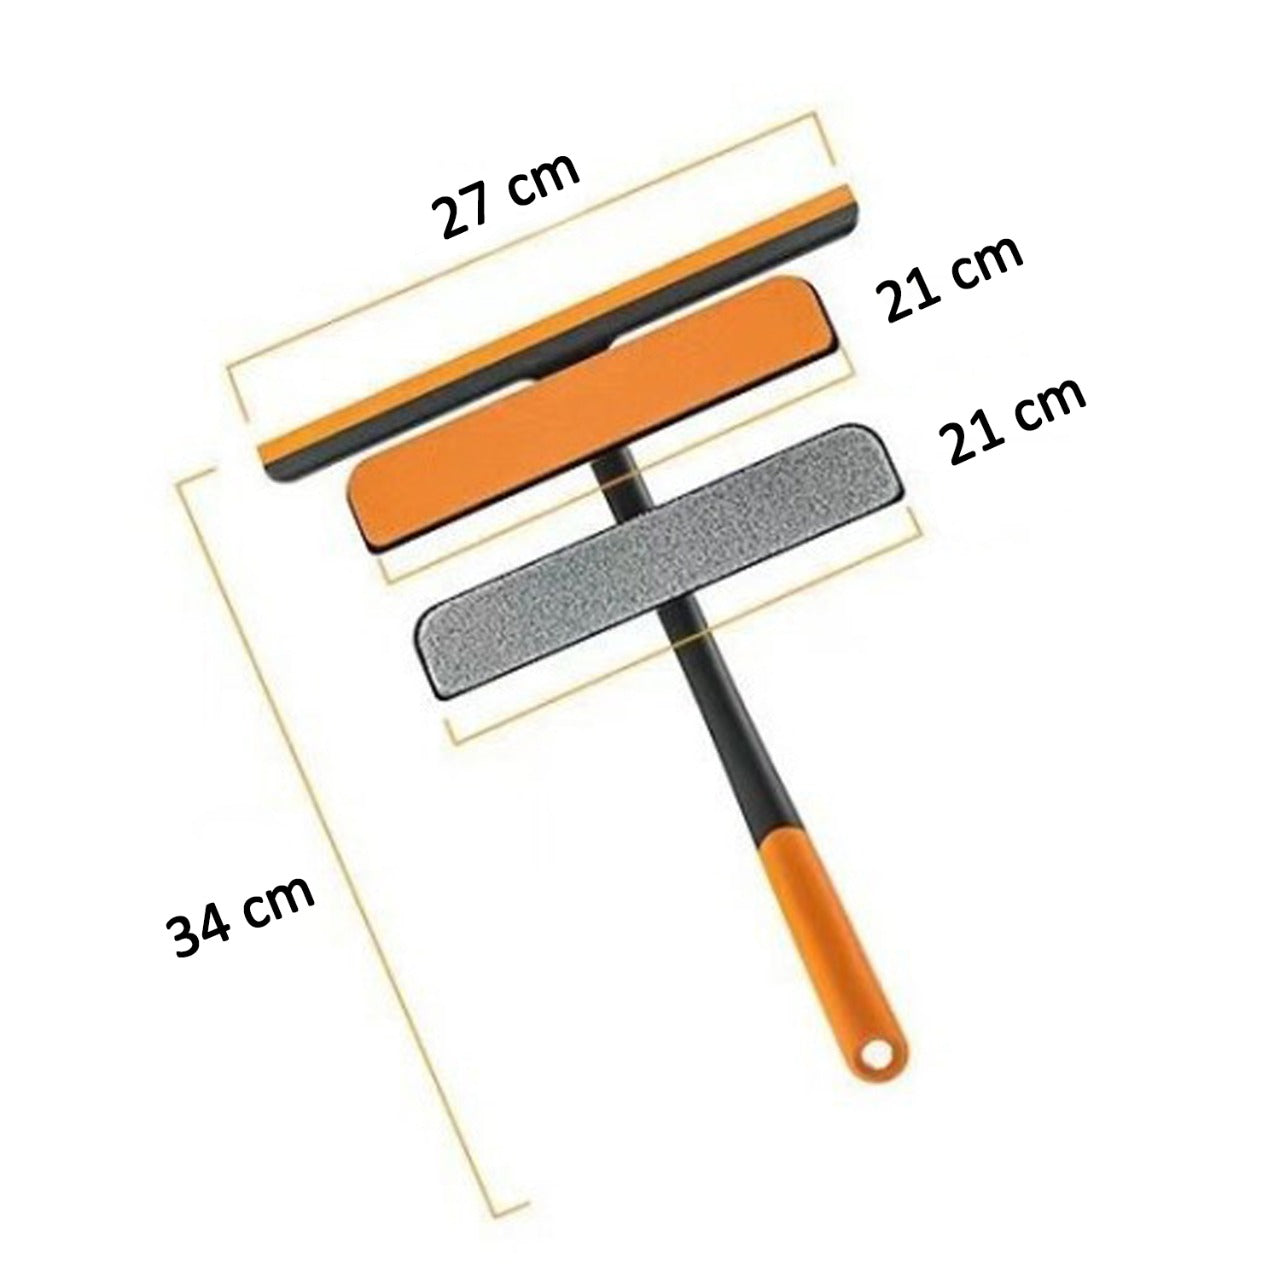 6087A PLASTIC 3 IN 1 ROTATABLE DOUBLE SIDE DESIGN CLEANING BRUSH GLASS WIPER FOR GLASS WINDOW, CAR WINDOW, MIRROR, FLOOR (MULTICOLOR) DeoDap